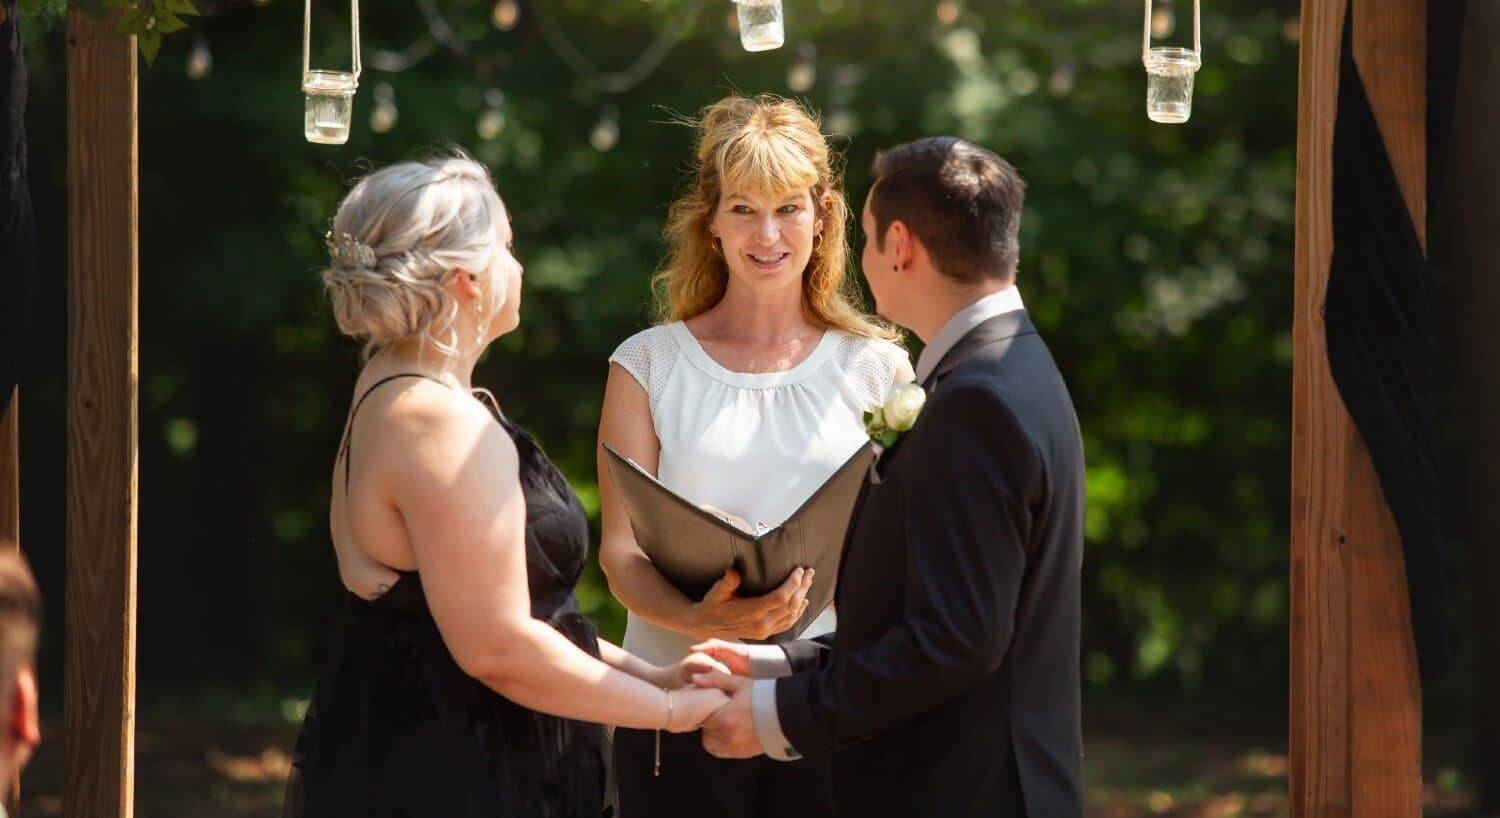 A bride and groom standing outdoors under a wooden arch in front of a female officiant